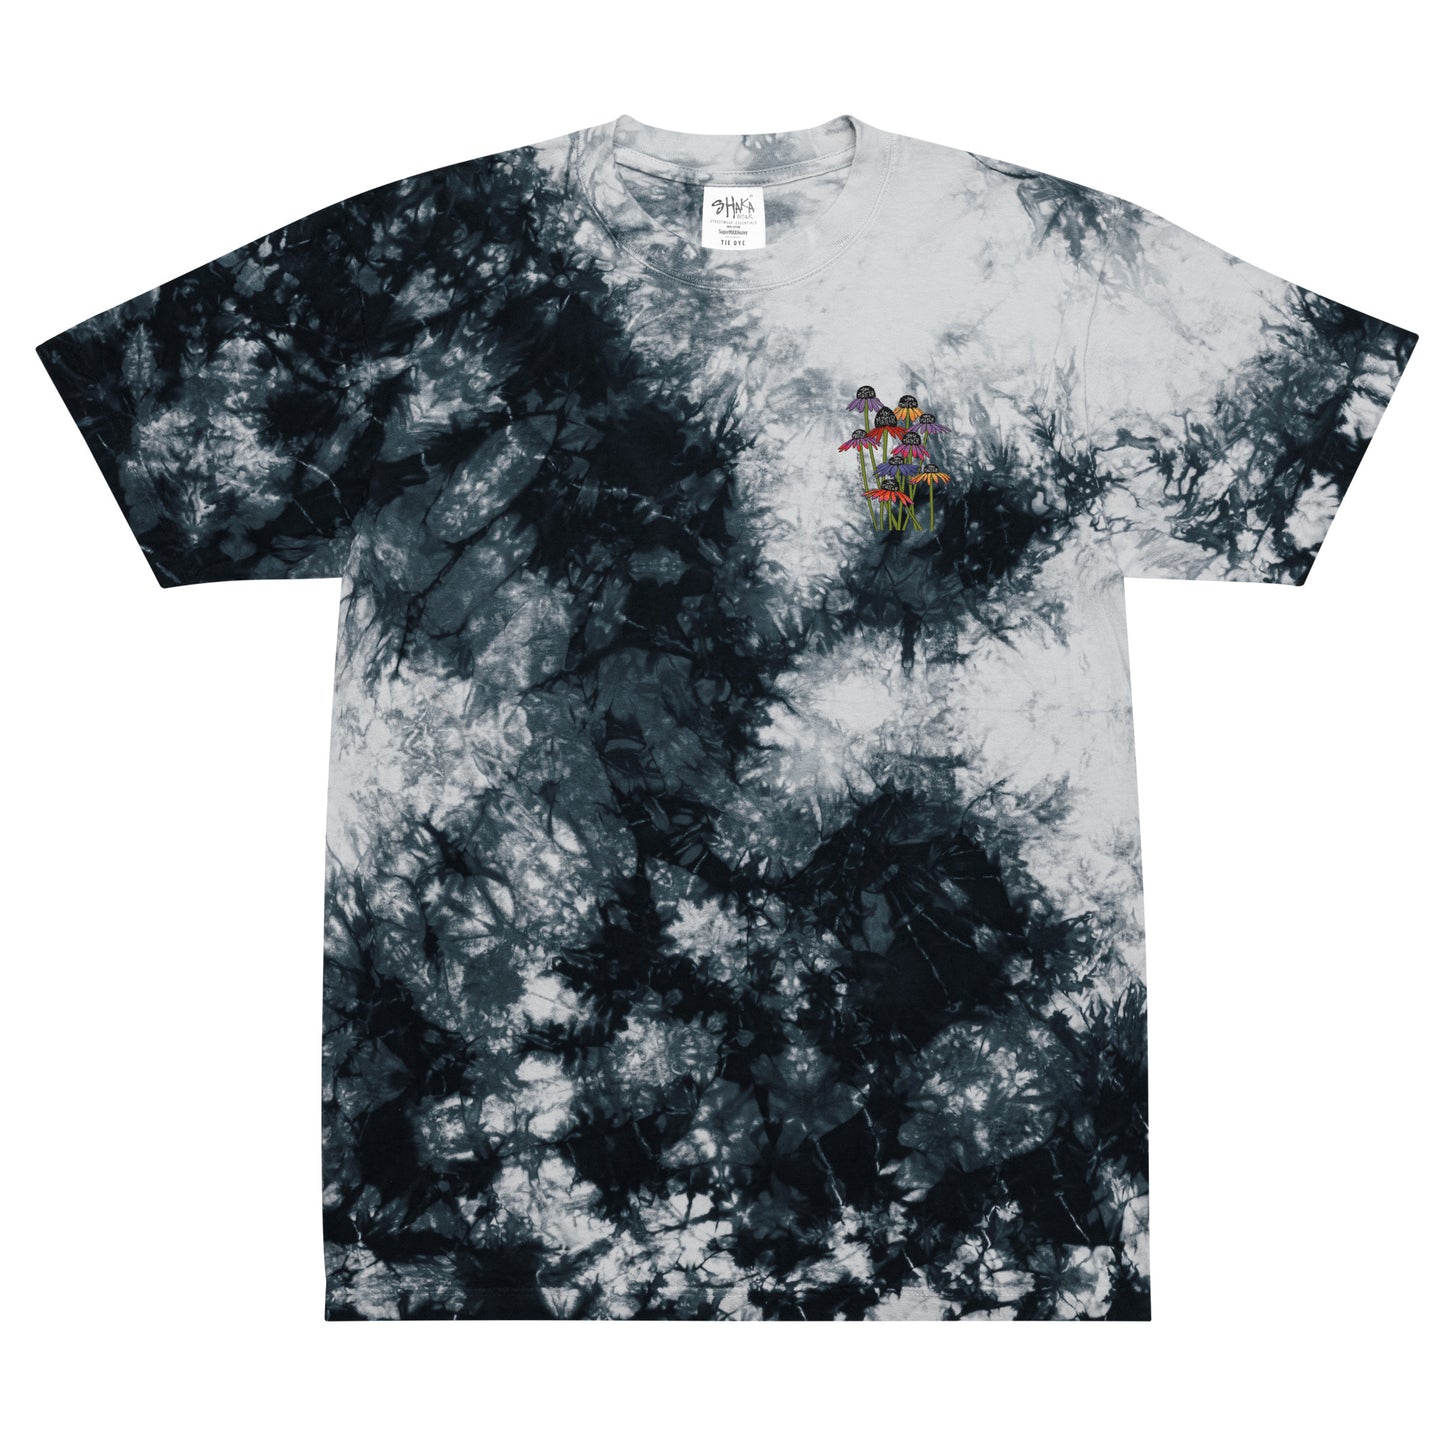 T-shirt Adult Unisex Oversized Tie-Dye You Matter Embroidered Tee